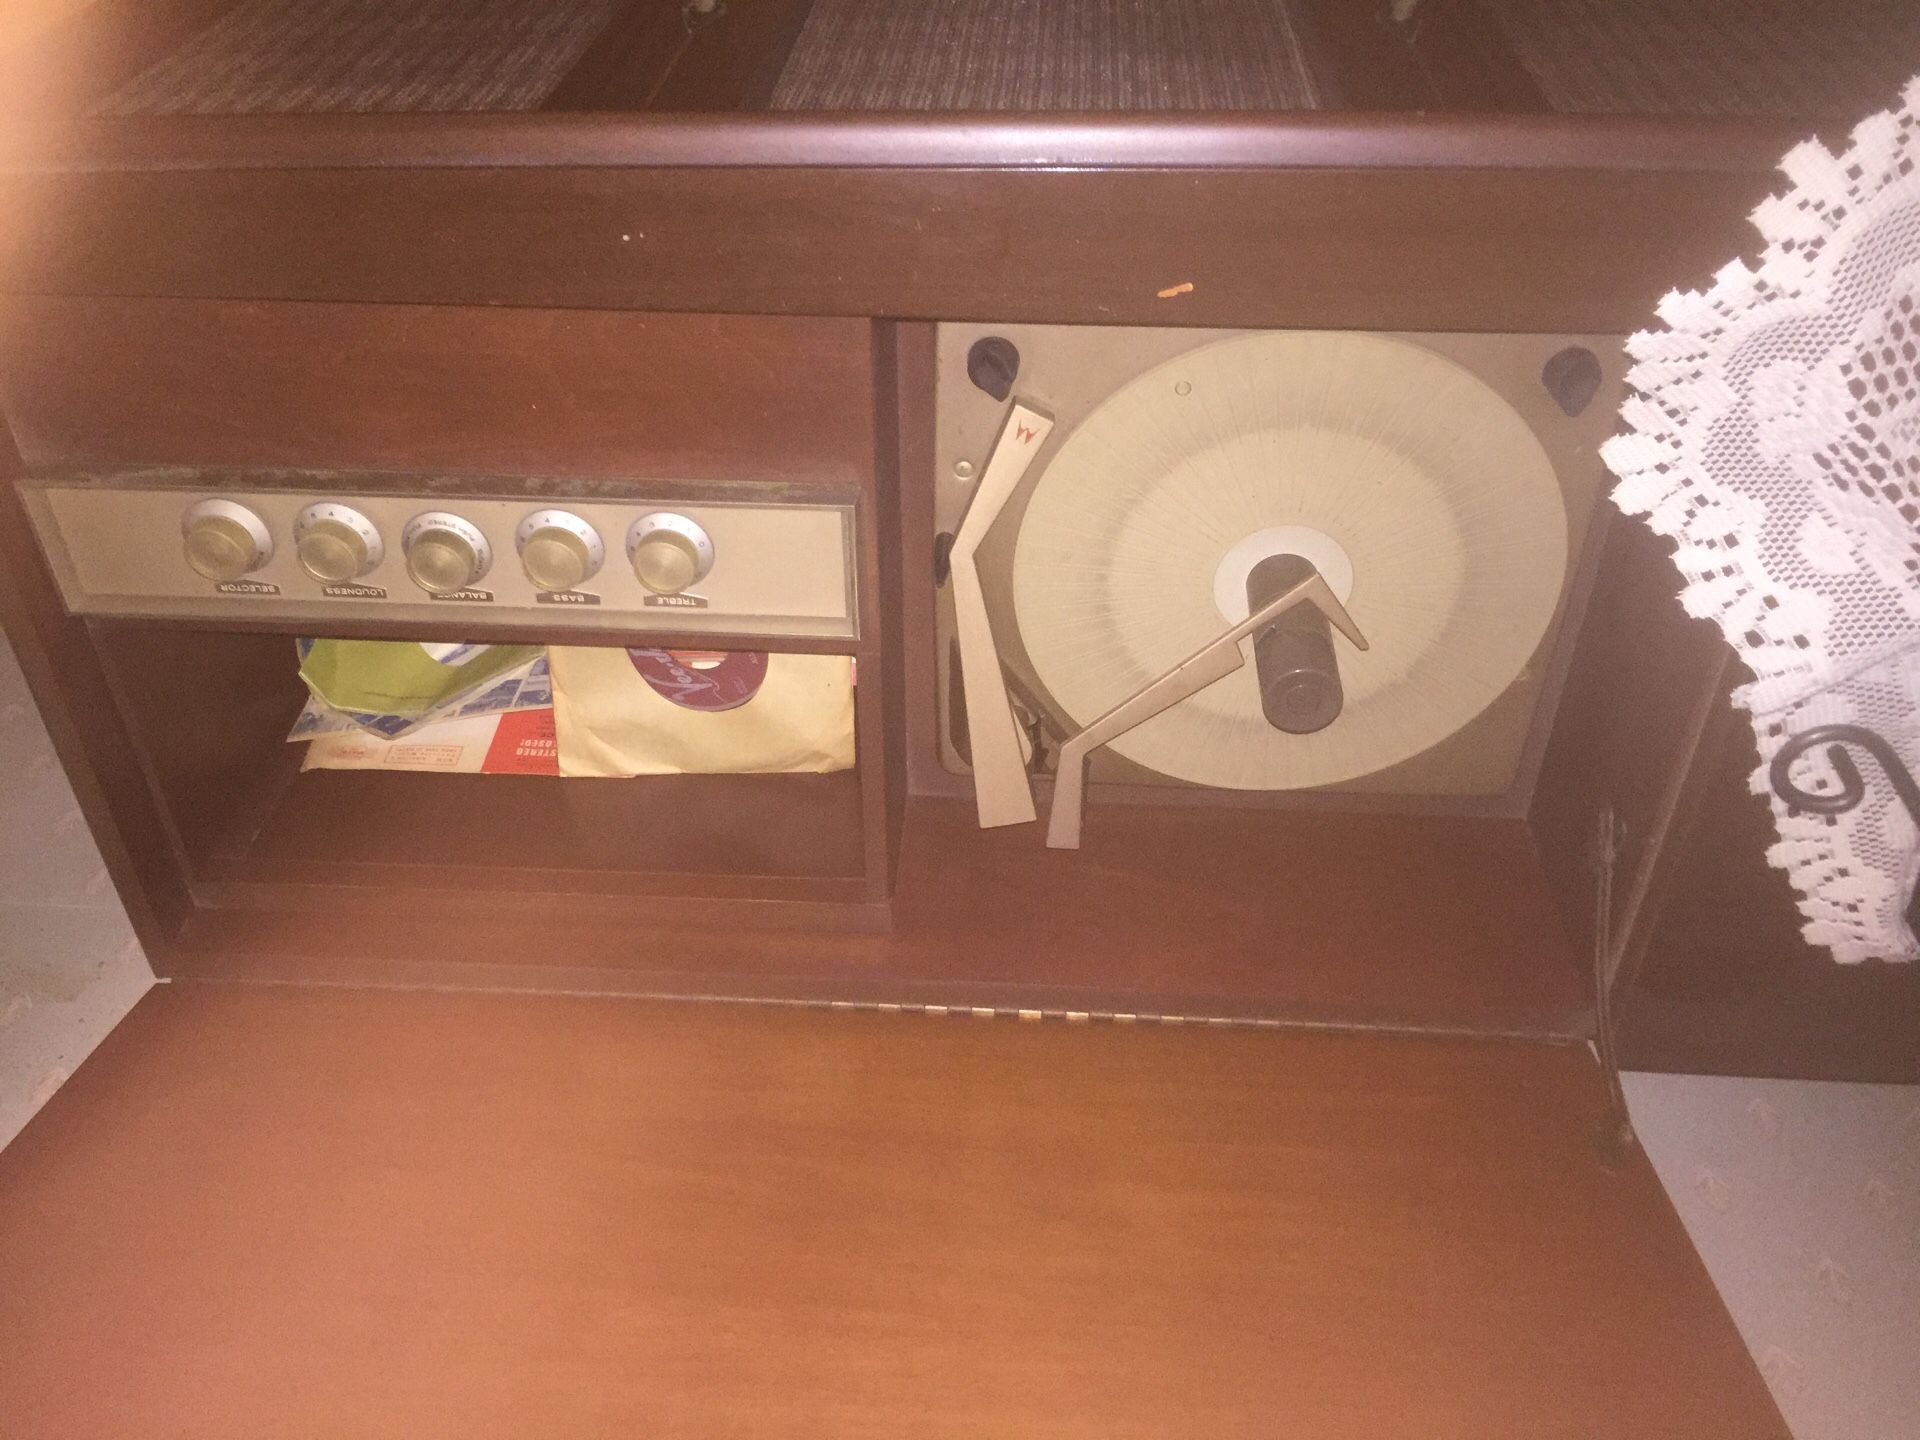 Antique record player along with table $350